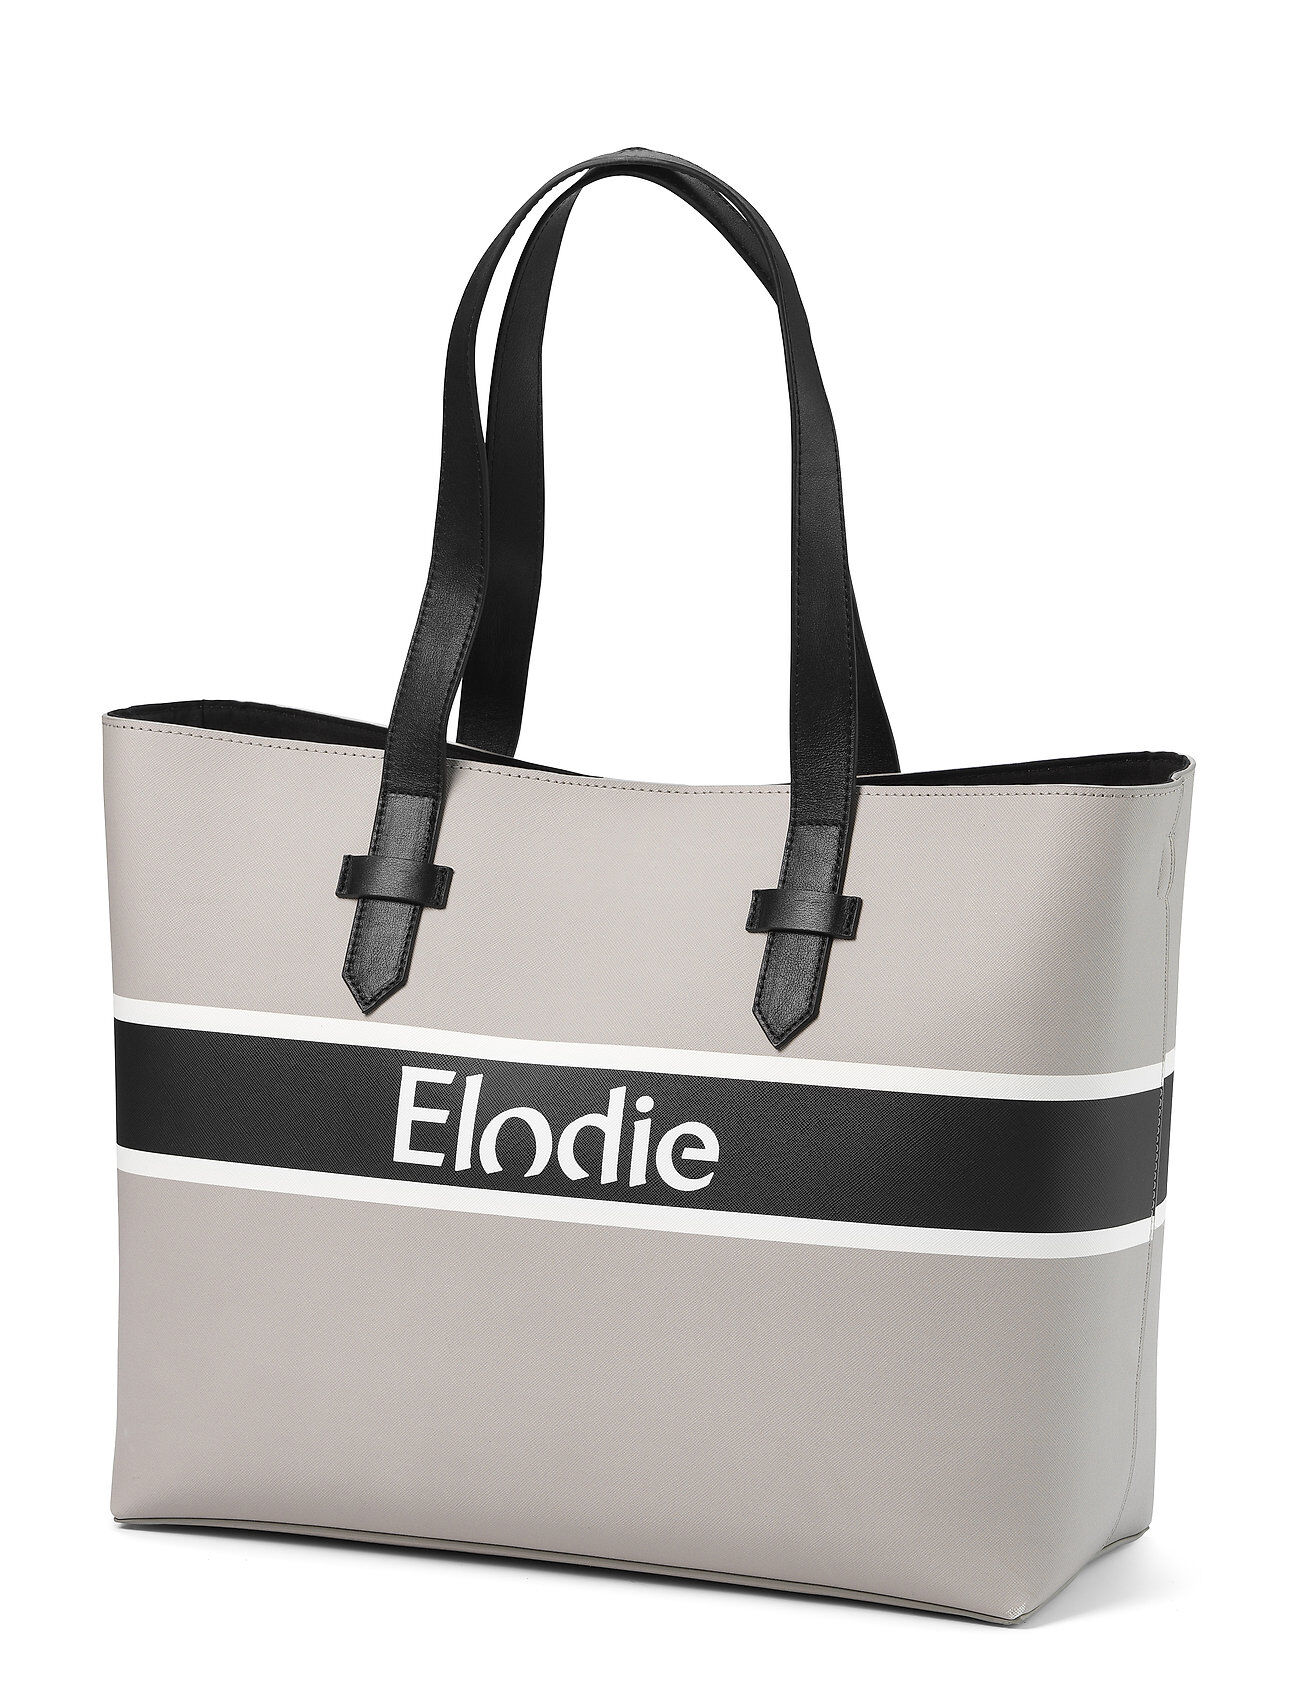 Elodie Details Changing Bag - Saffiano Logo Tote Moonshell Baby & Maternity Care & Hygiene Changing Bags Grå Elodie Details